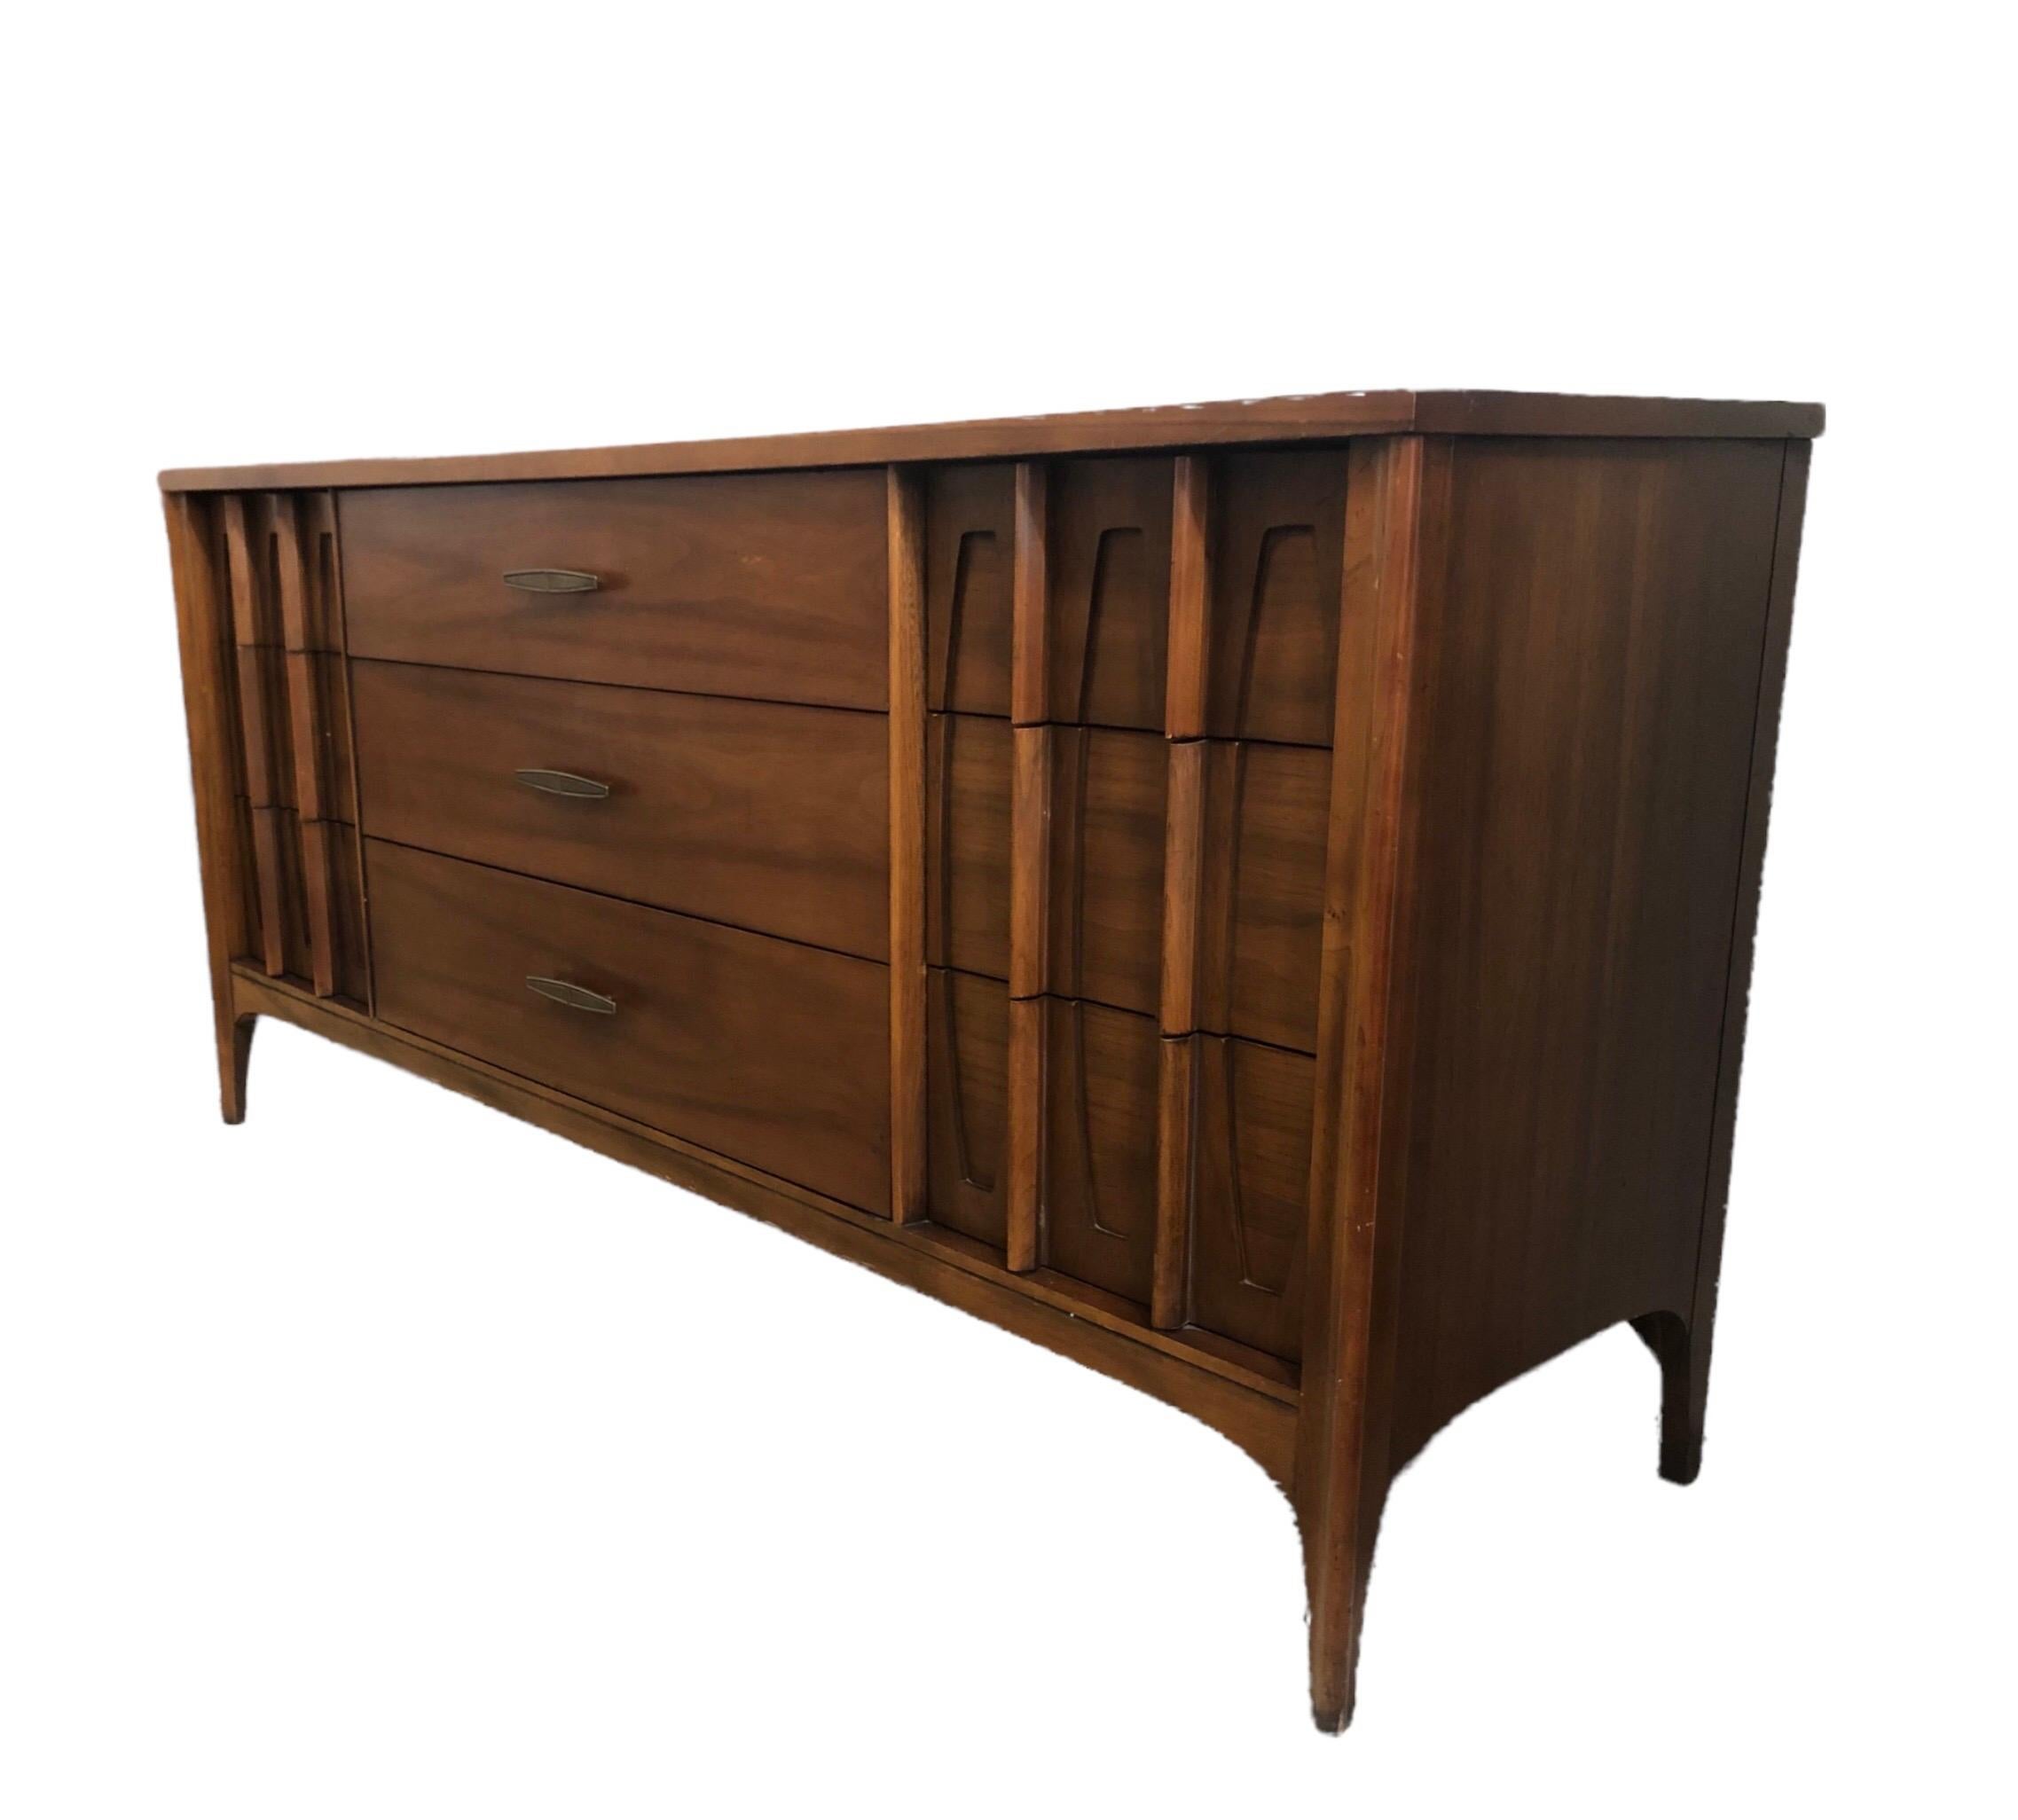 This stylish Kent Coffey triple dresser or credenza has lovely recessed scalloped accents and vertical wood pulls! Sleek and sculpted design with textured brass pull down the three middle drawers and solid walnut wood.

Measures: 64